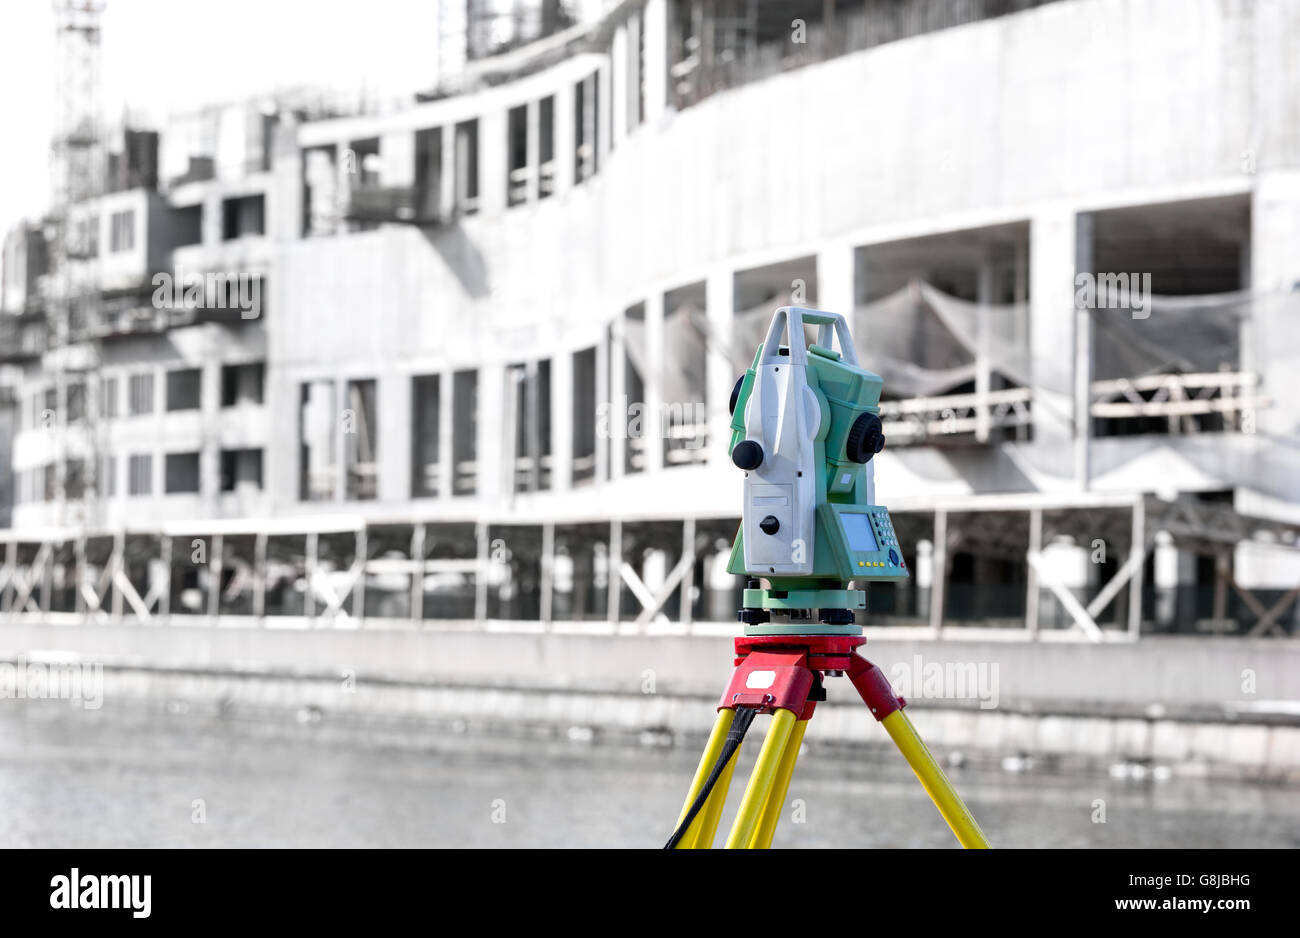 Measurement device (theodolite) mounted on tripod at construction site Stock Photo